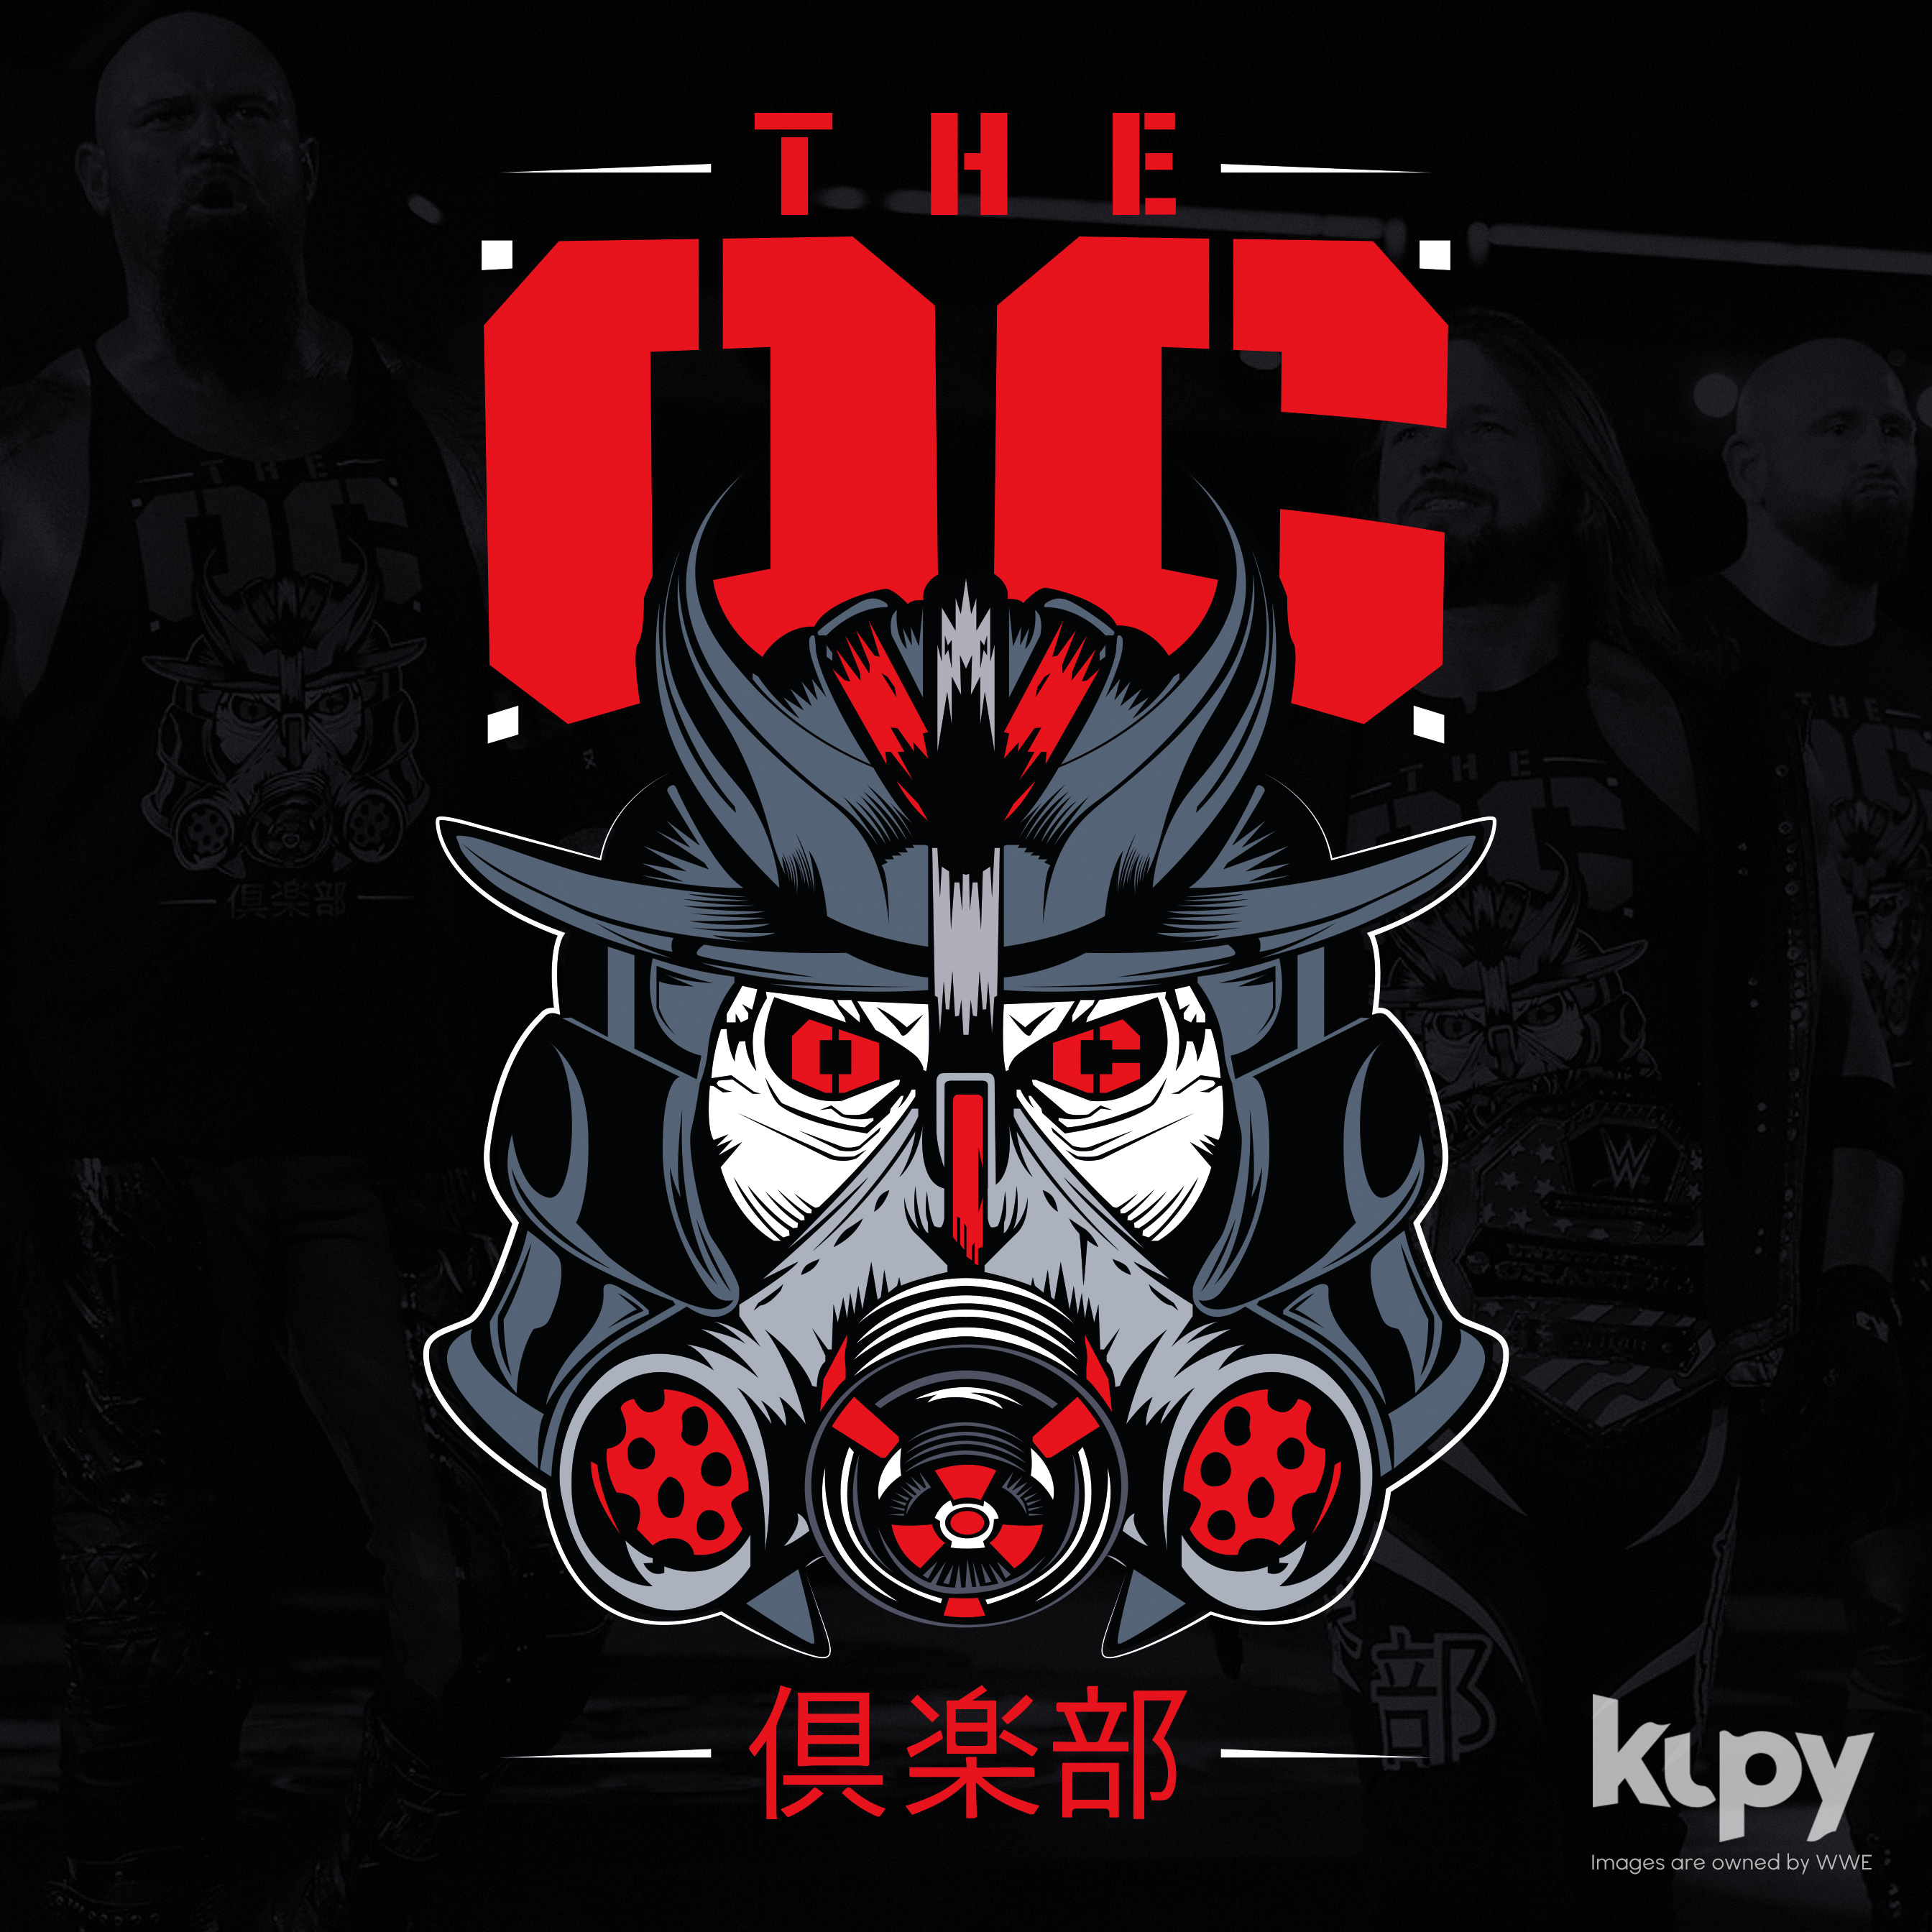 Kupy Wrestling Wallpapers The Latest Source For Your Wwe Wrestling Wallpaper Needs Mobile Hd And 4k Resolutions Available Blog Archive The Oc Wallpaper That Matters Kupy Wrestling Wallpapers